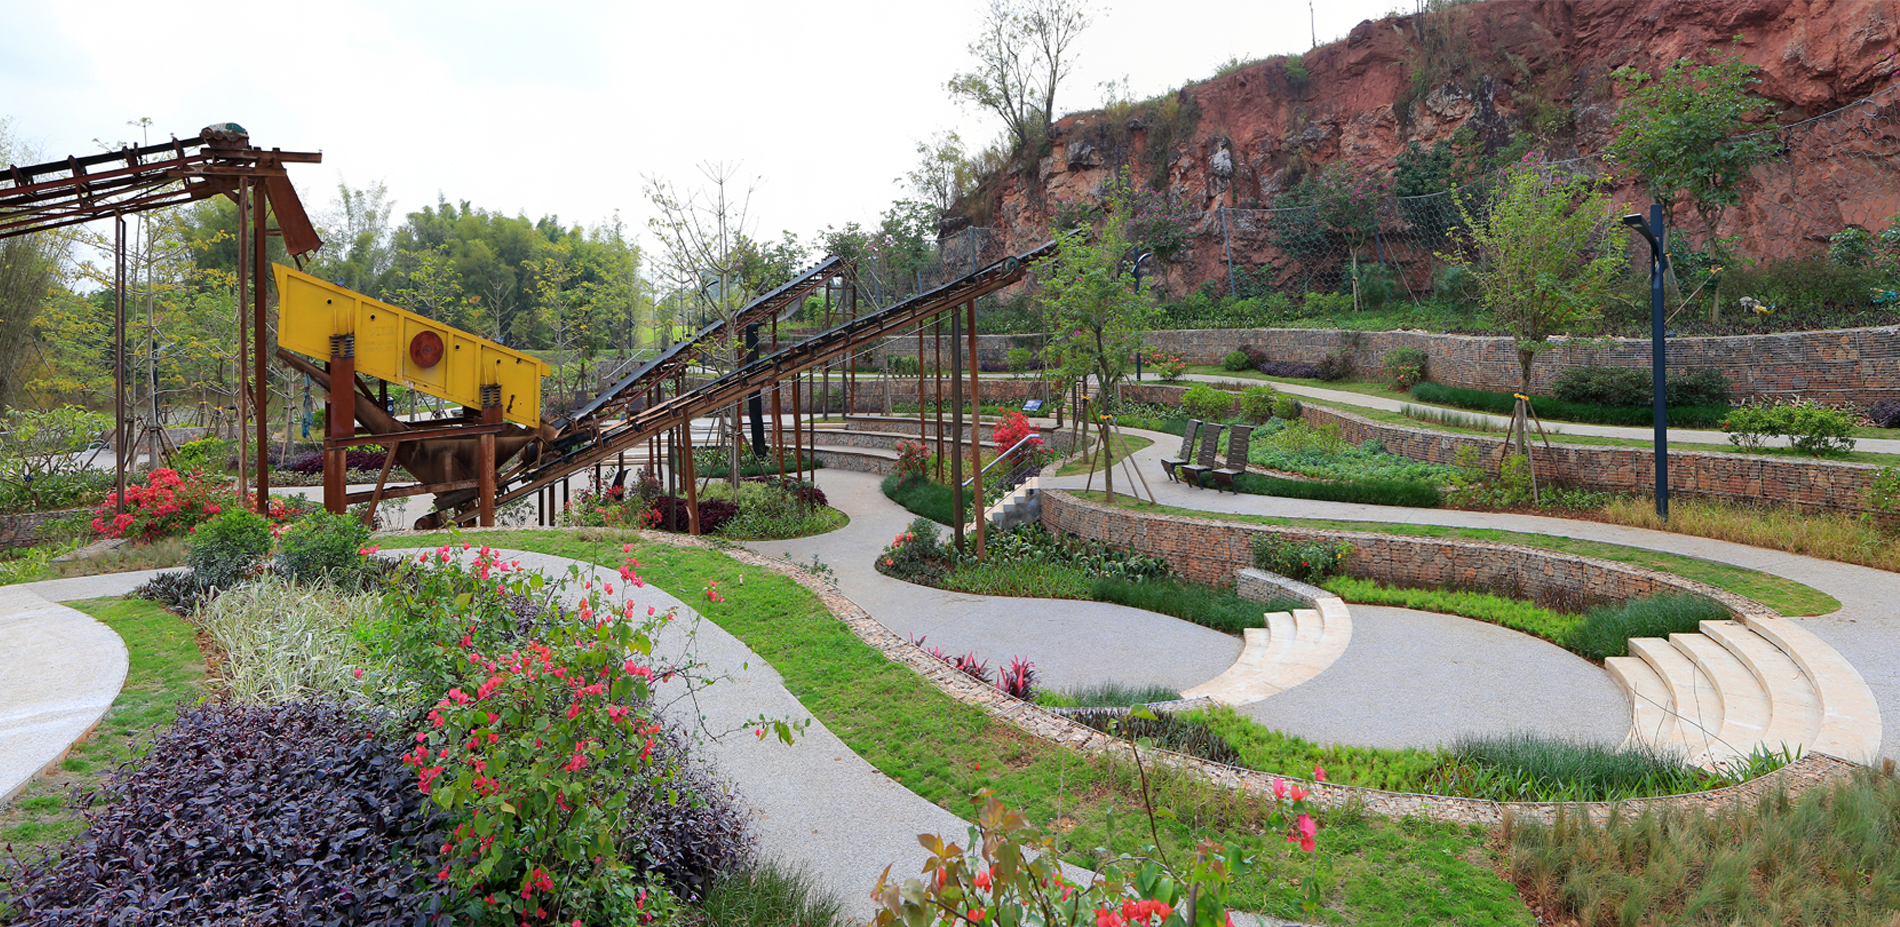 A Terrace Garden with Preserved Mining Machinery (Quarry No. 6)